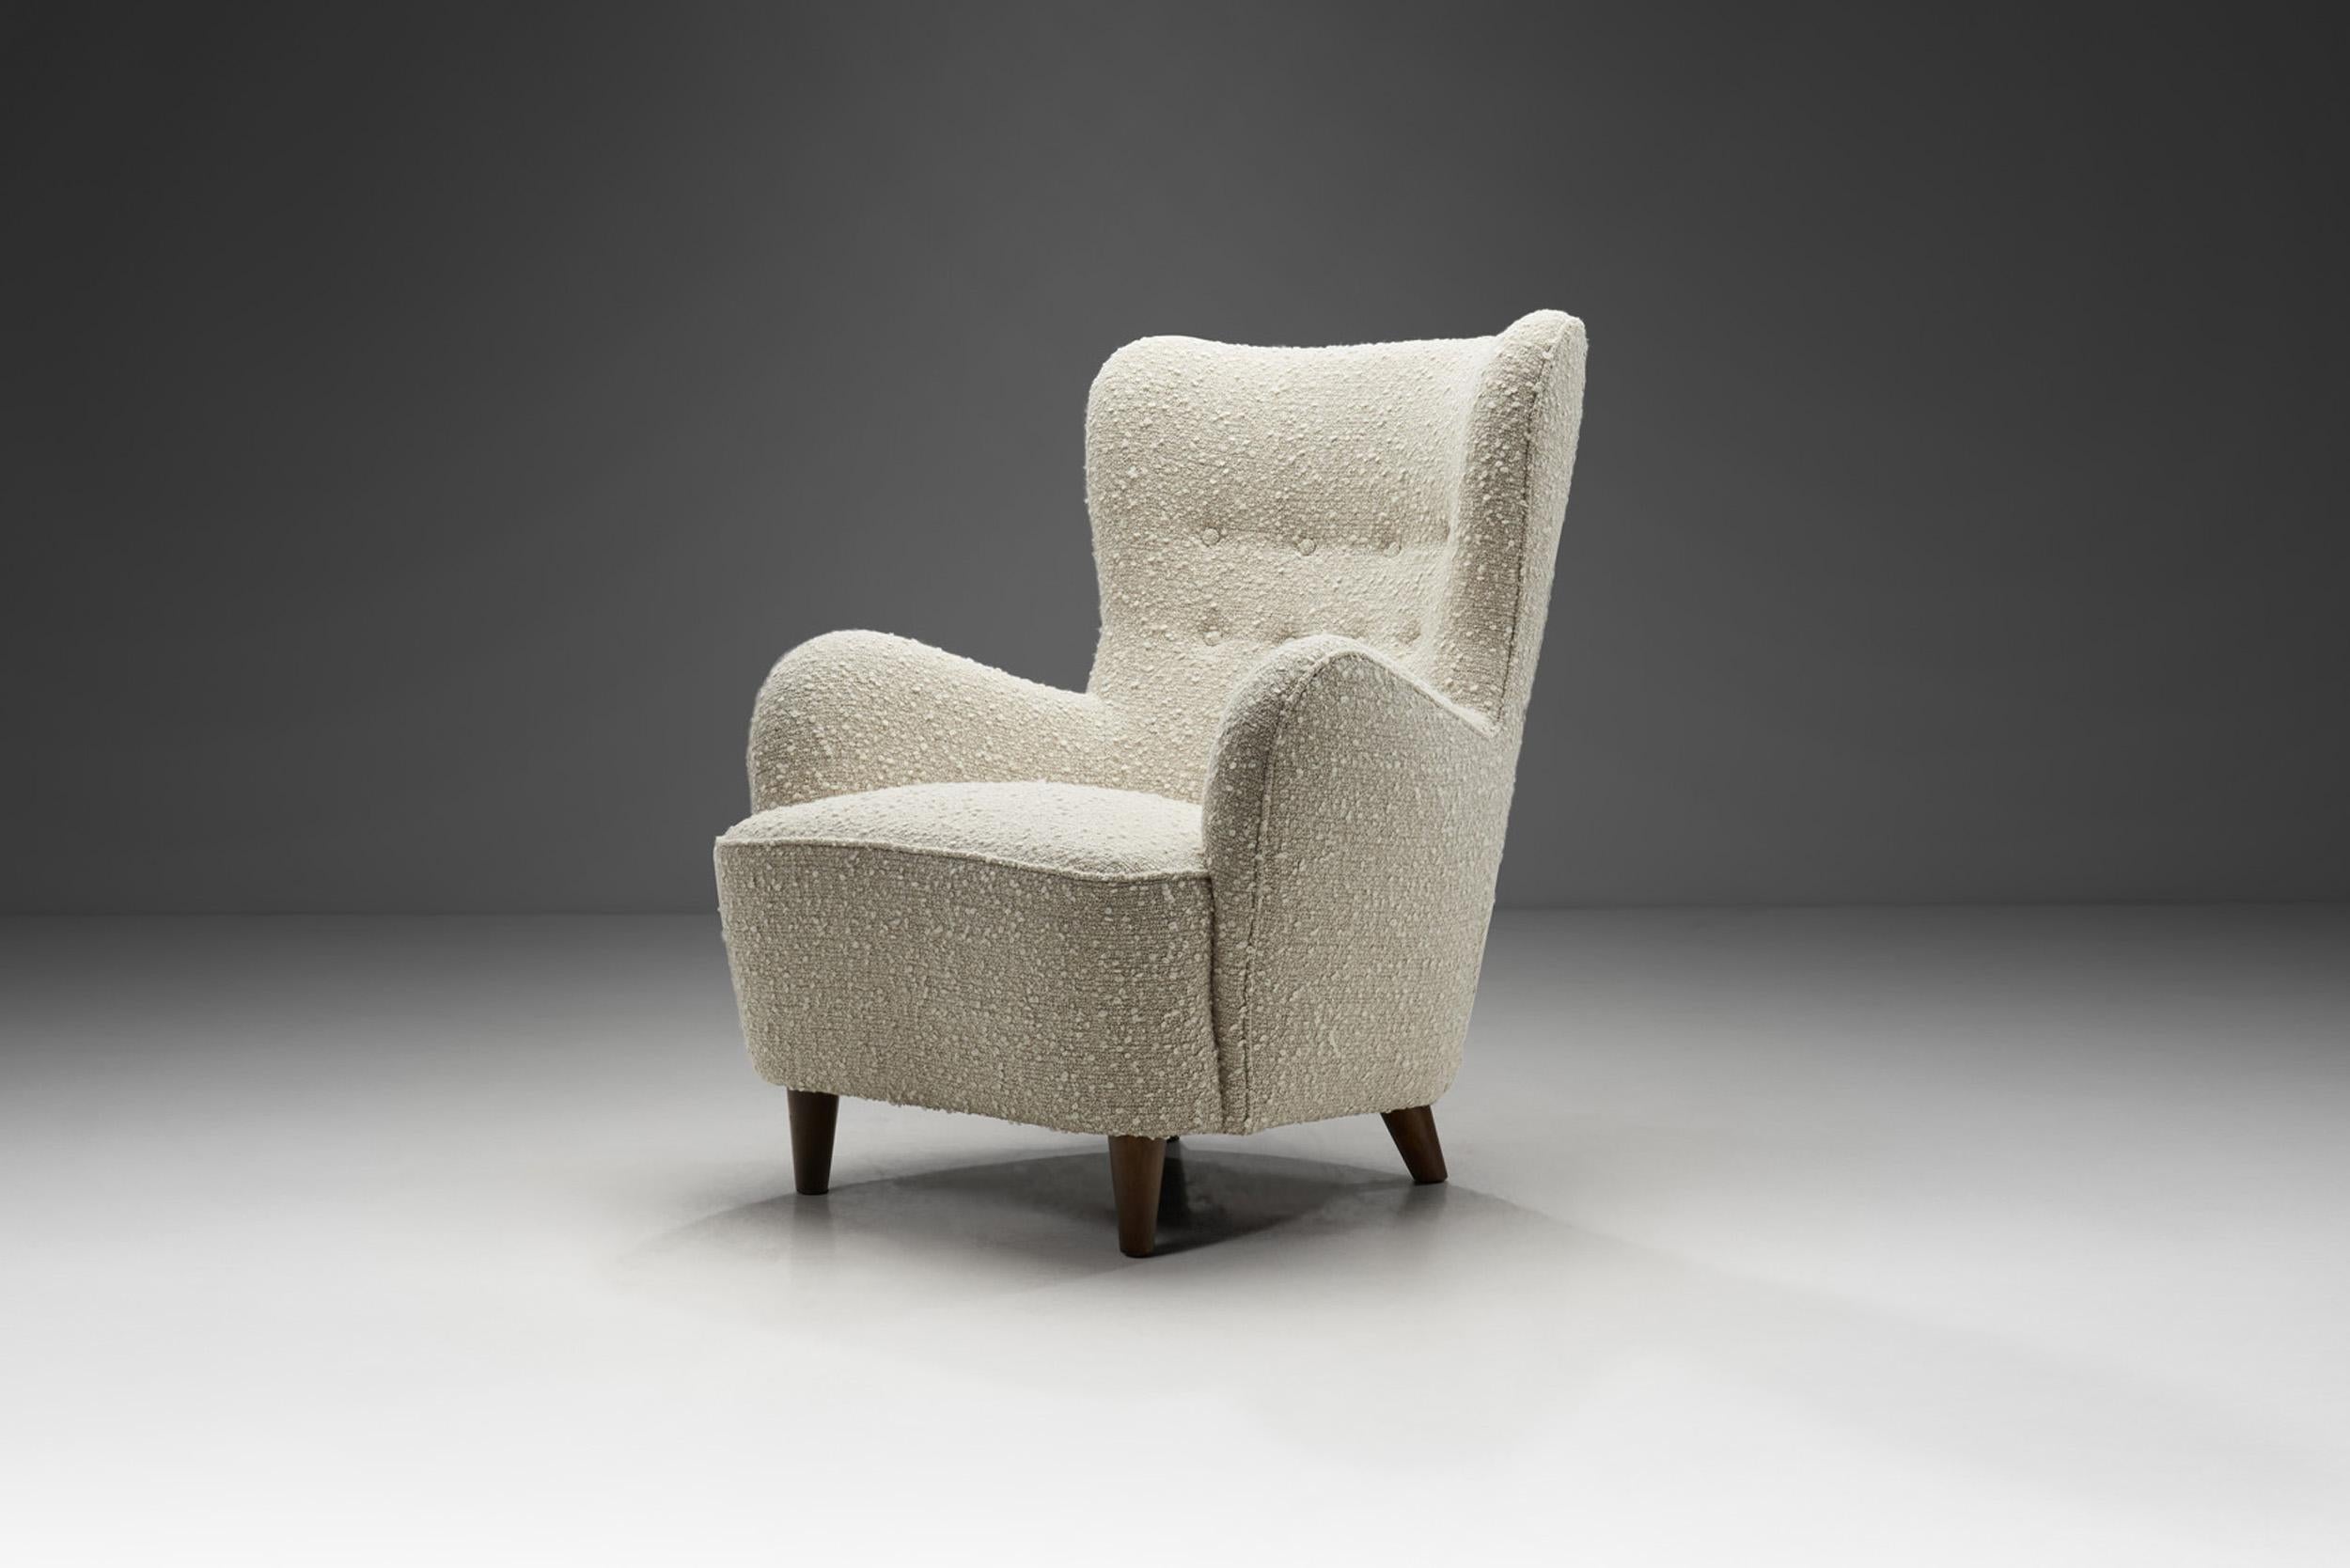 Throughout Scandinavia, there's a long history of pride in craftsmanship using natural materials like wood. This beautiful wingback chair is a great representation of the quality and craftsmanship of Scandinavian master cabinetmakers and the